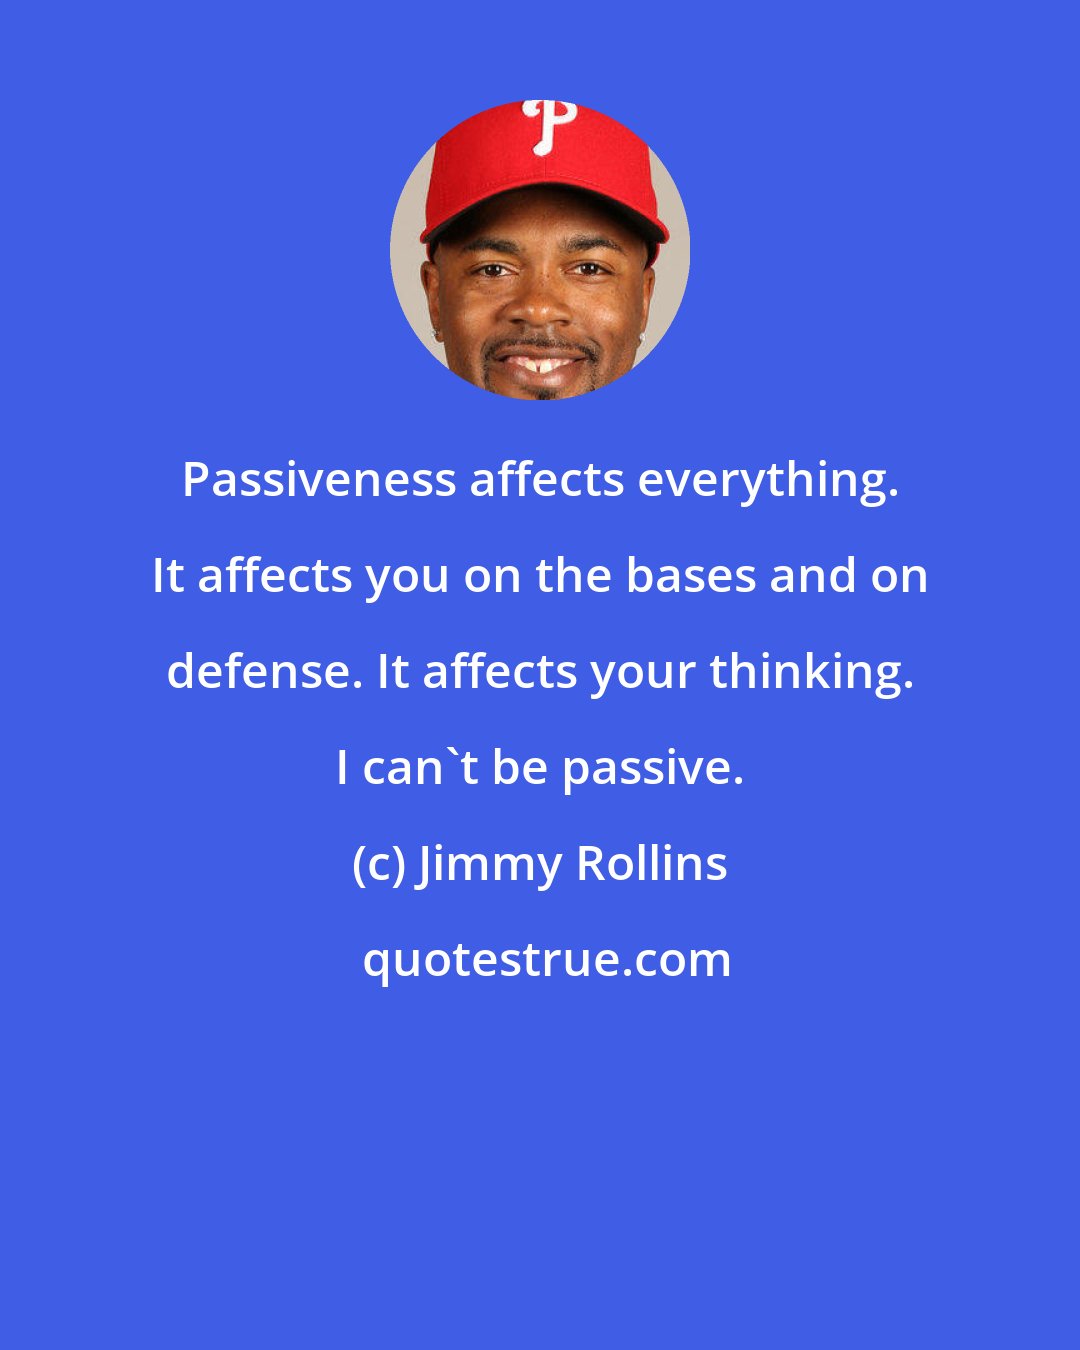 Jimmy Rollins: Passiveness affects everything. It affects you on the bases and on defense. It affects your thinking. I can't be passive.